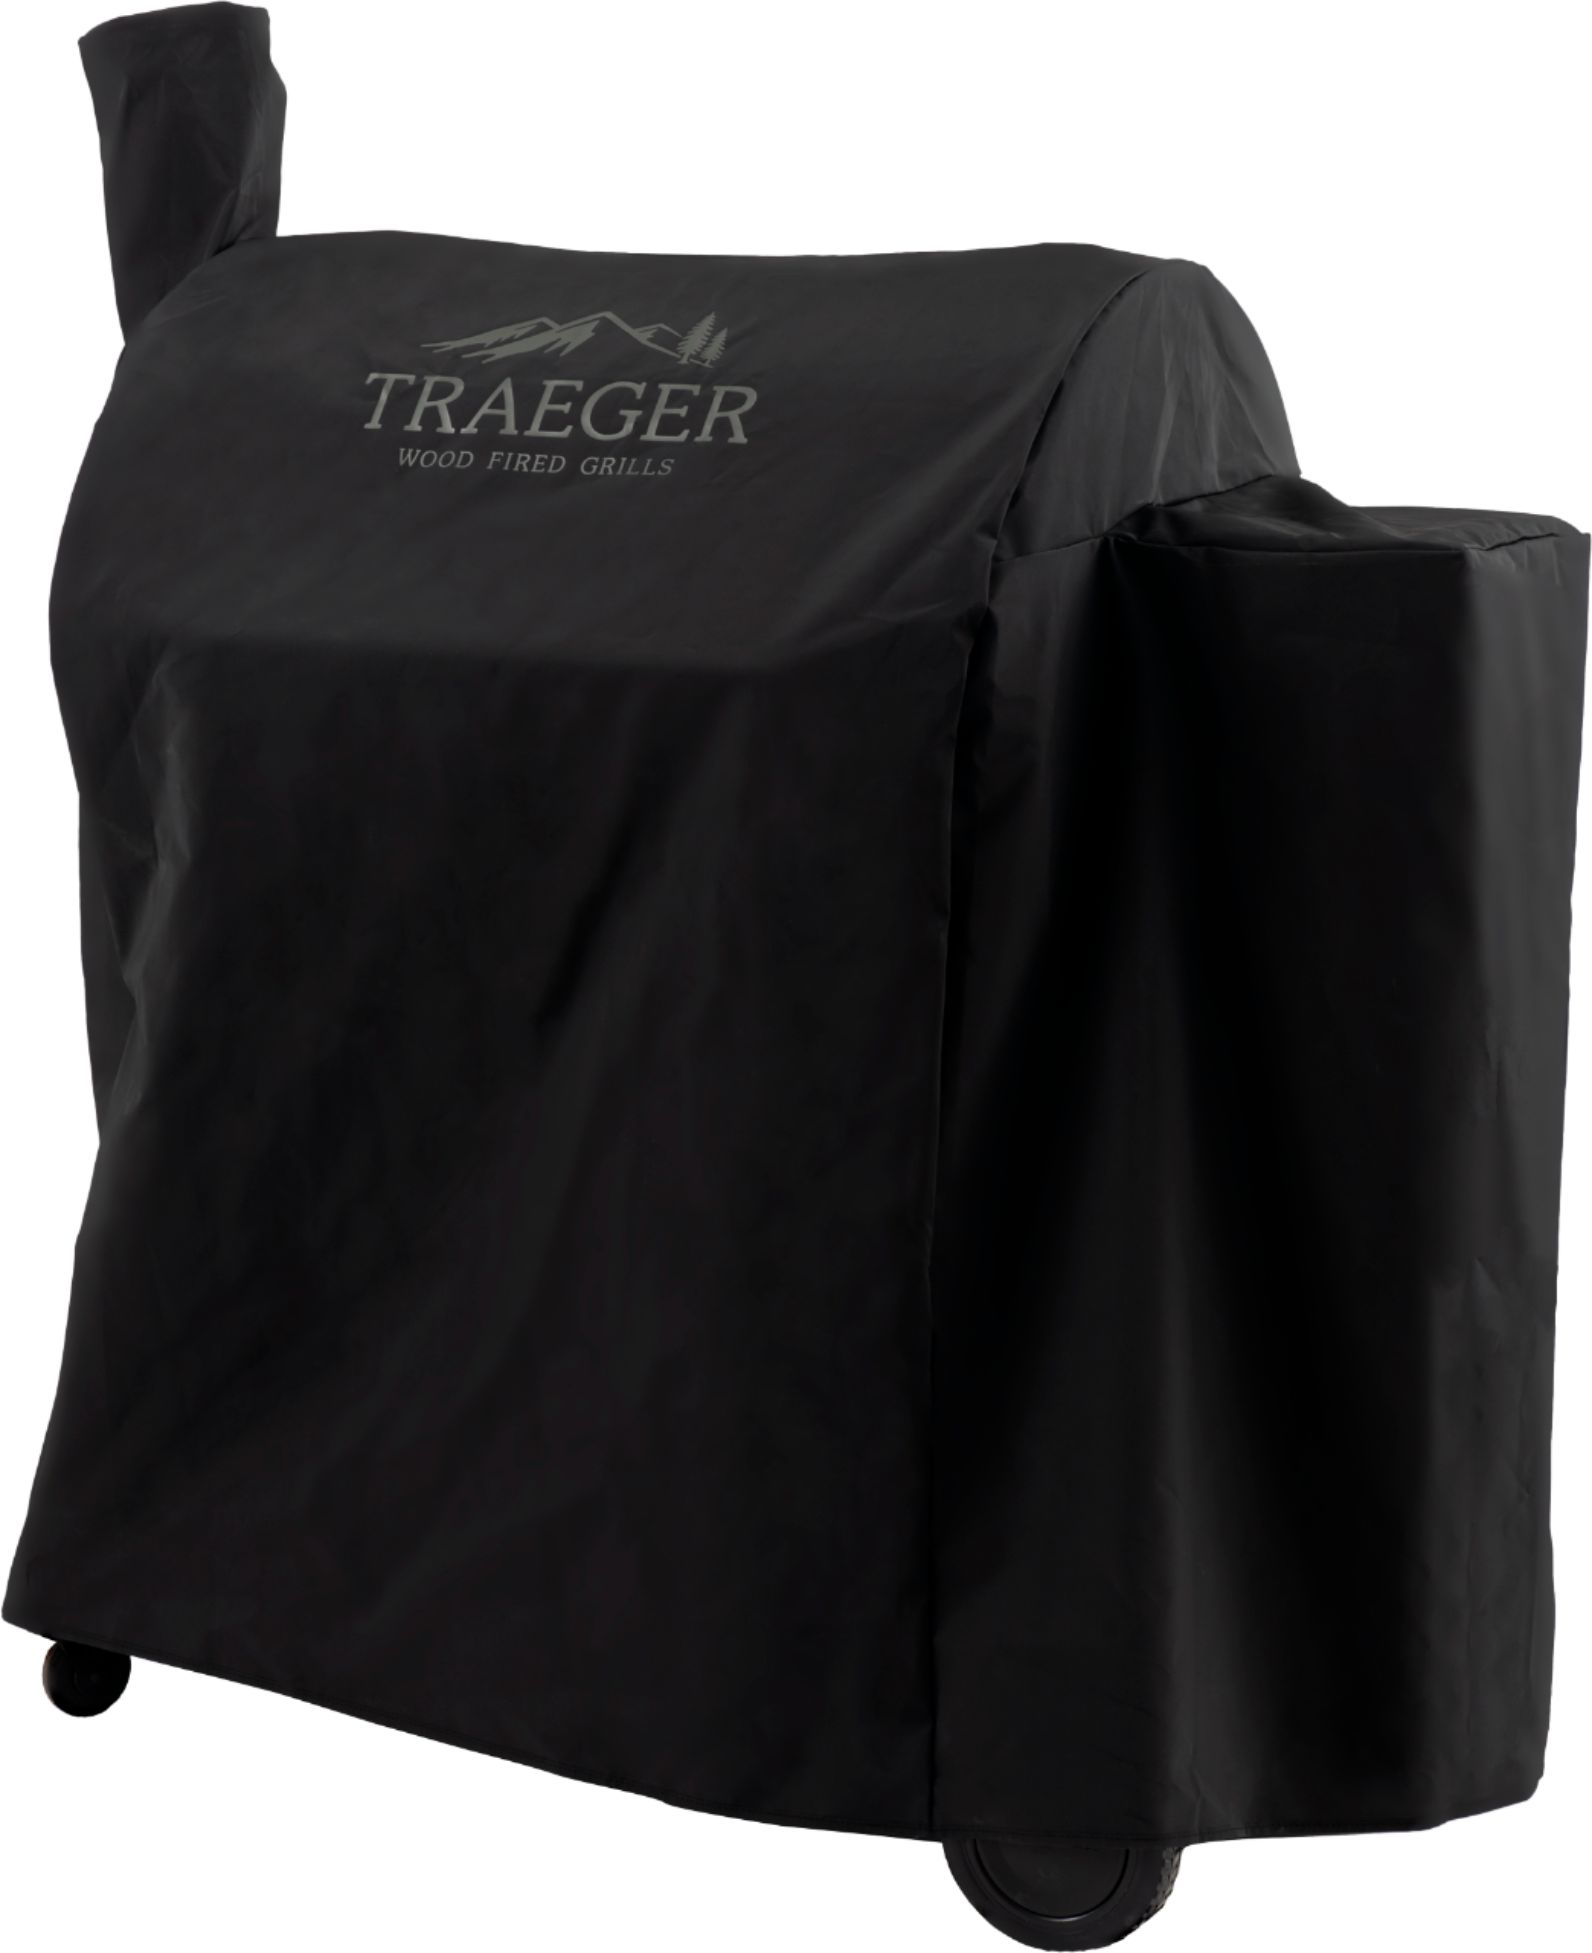 Angle View: Traeger Grills - Full-length Grill Cover - Pro 575 - Black